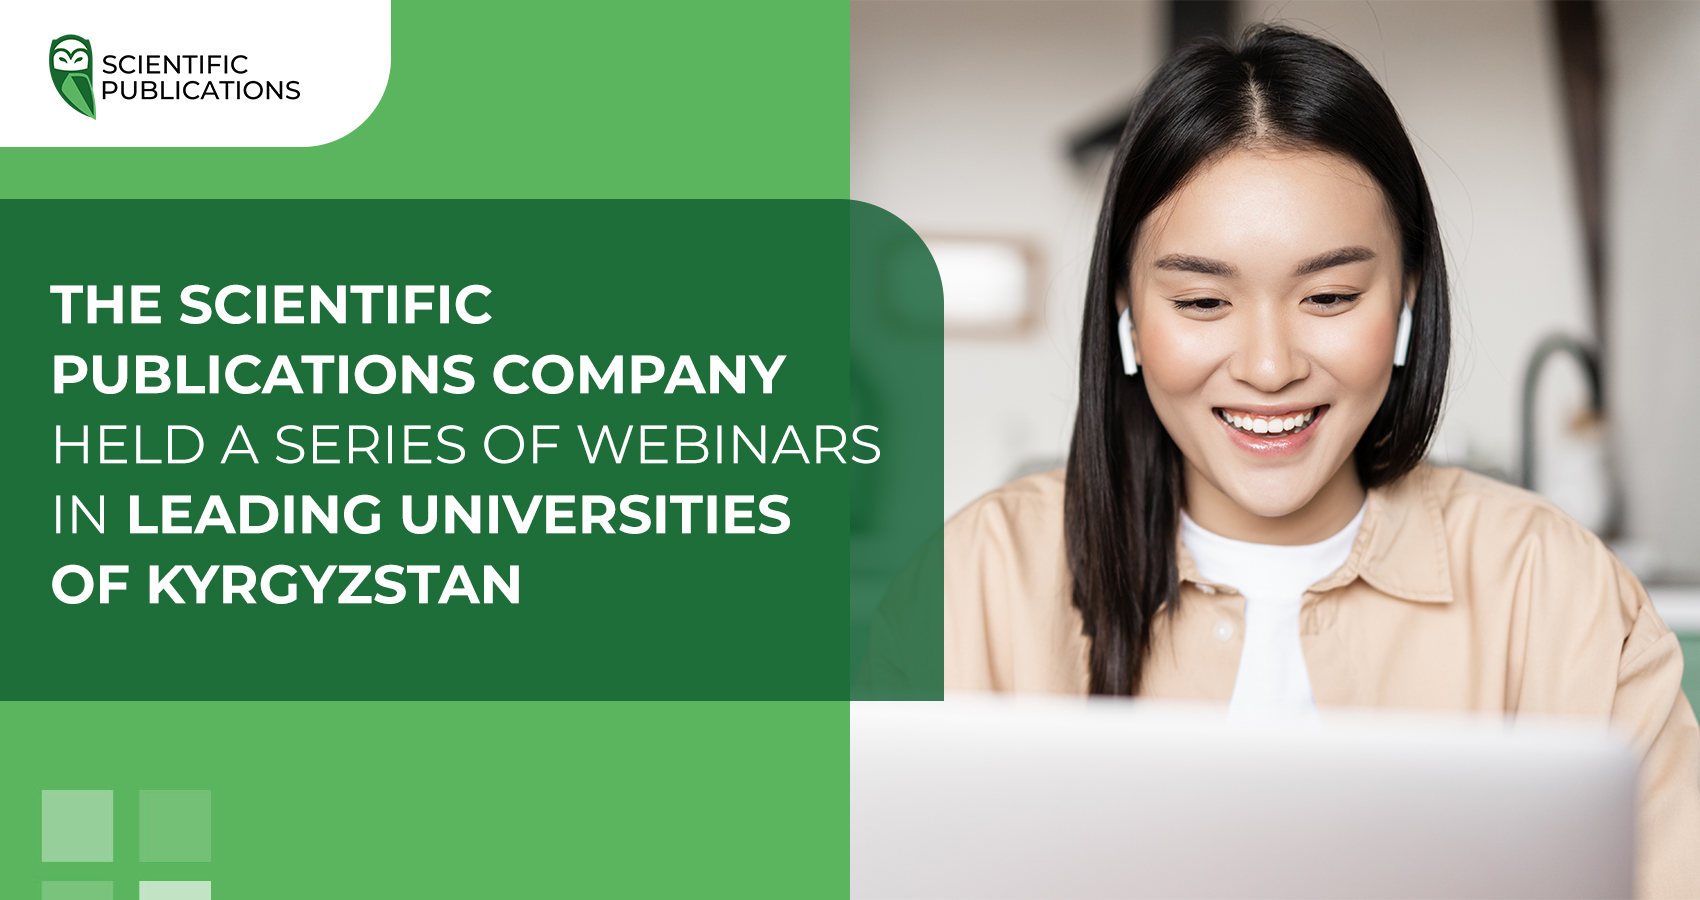 The Scientific Publications Company held a series of webinars in leading universities of Kyrgyzstan